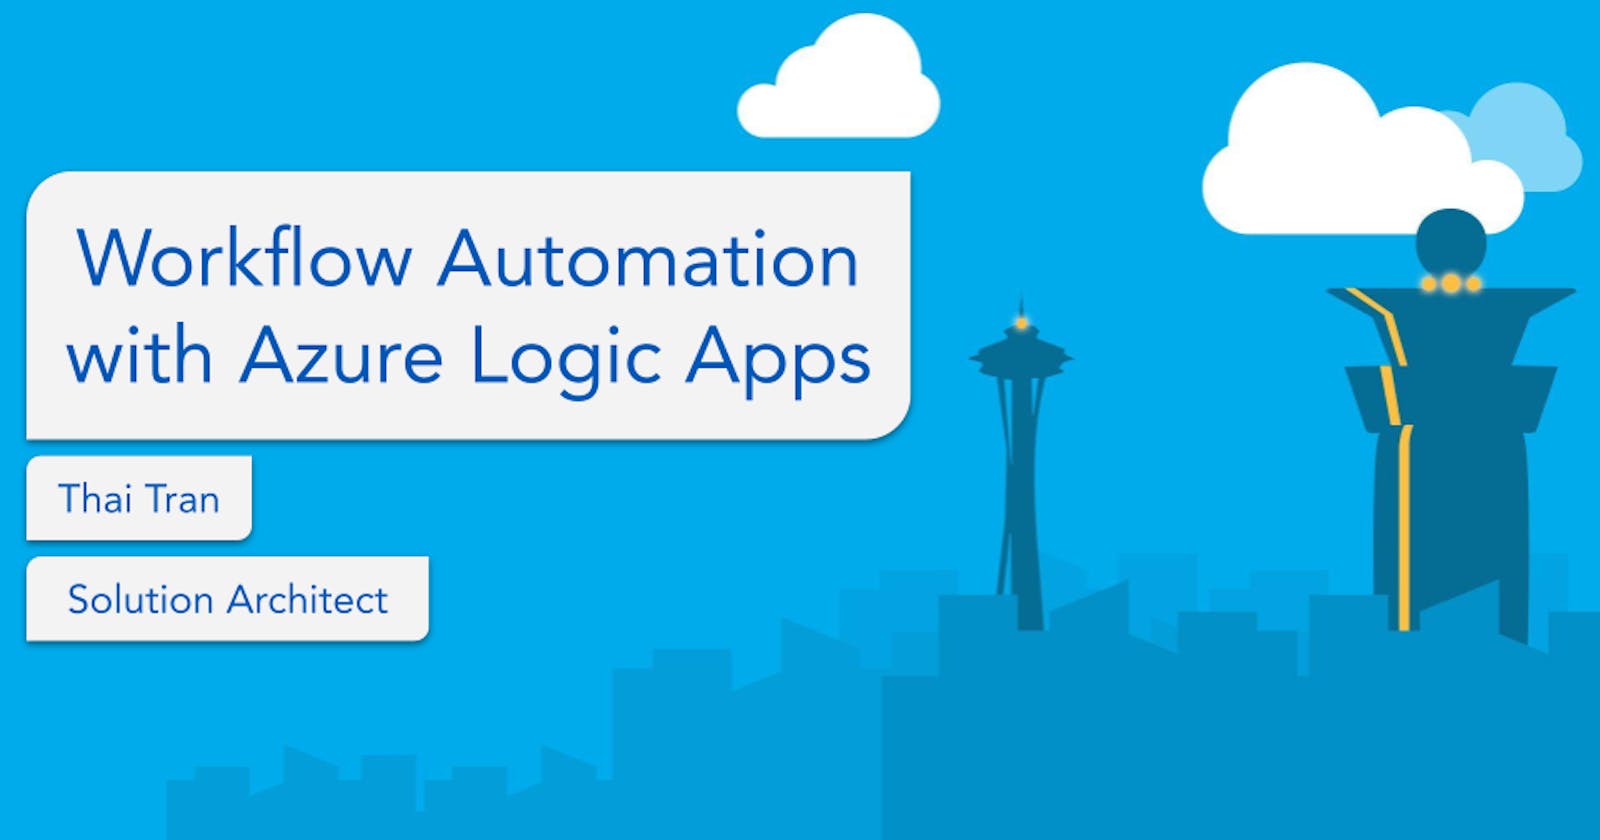 Workflow automation with Azure Logic Apps